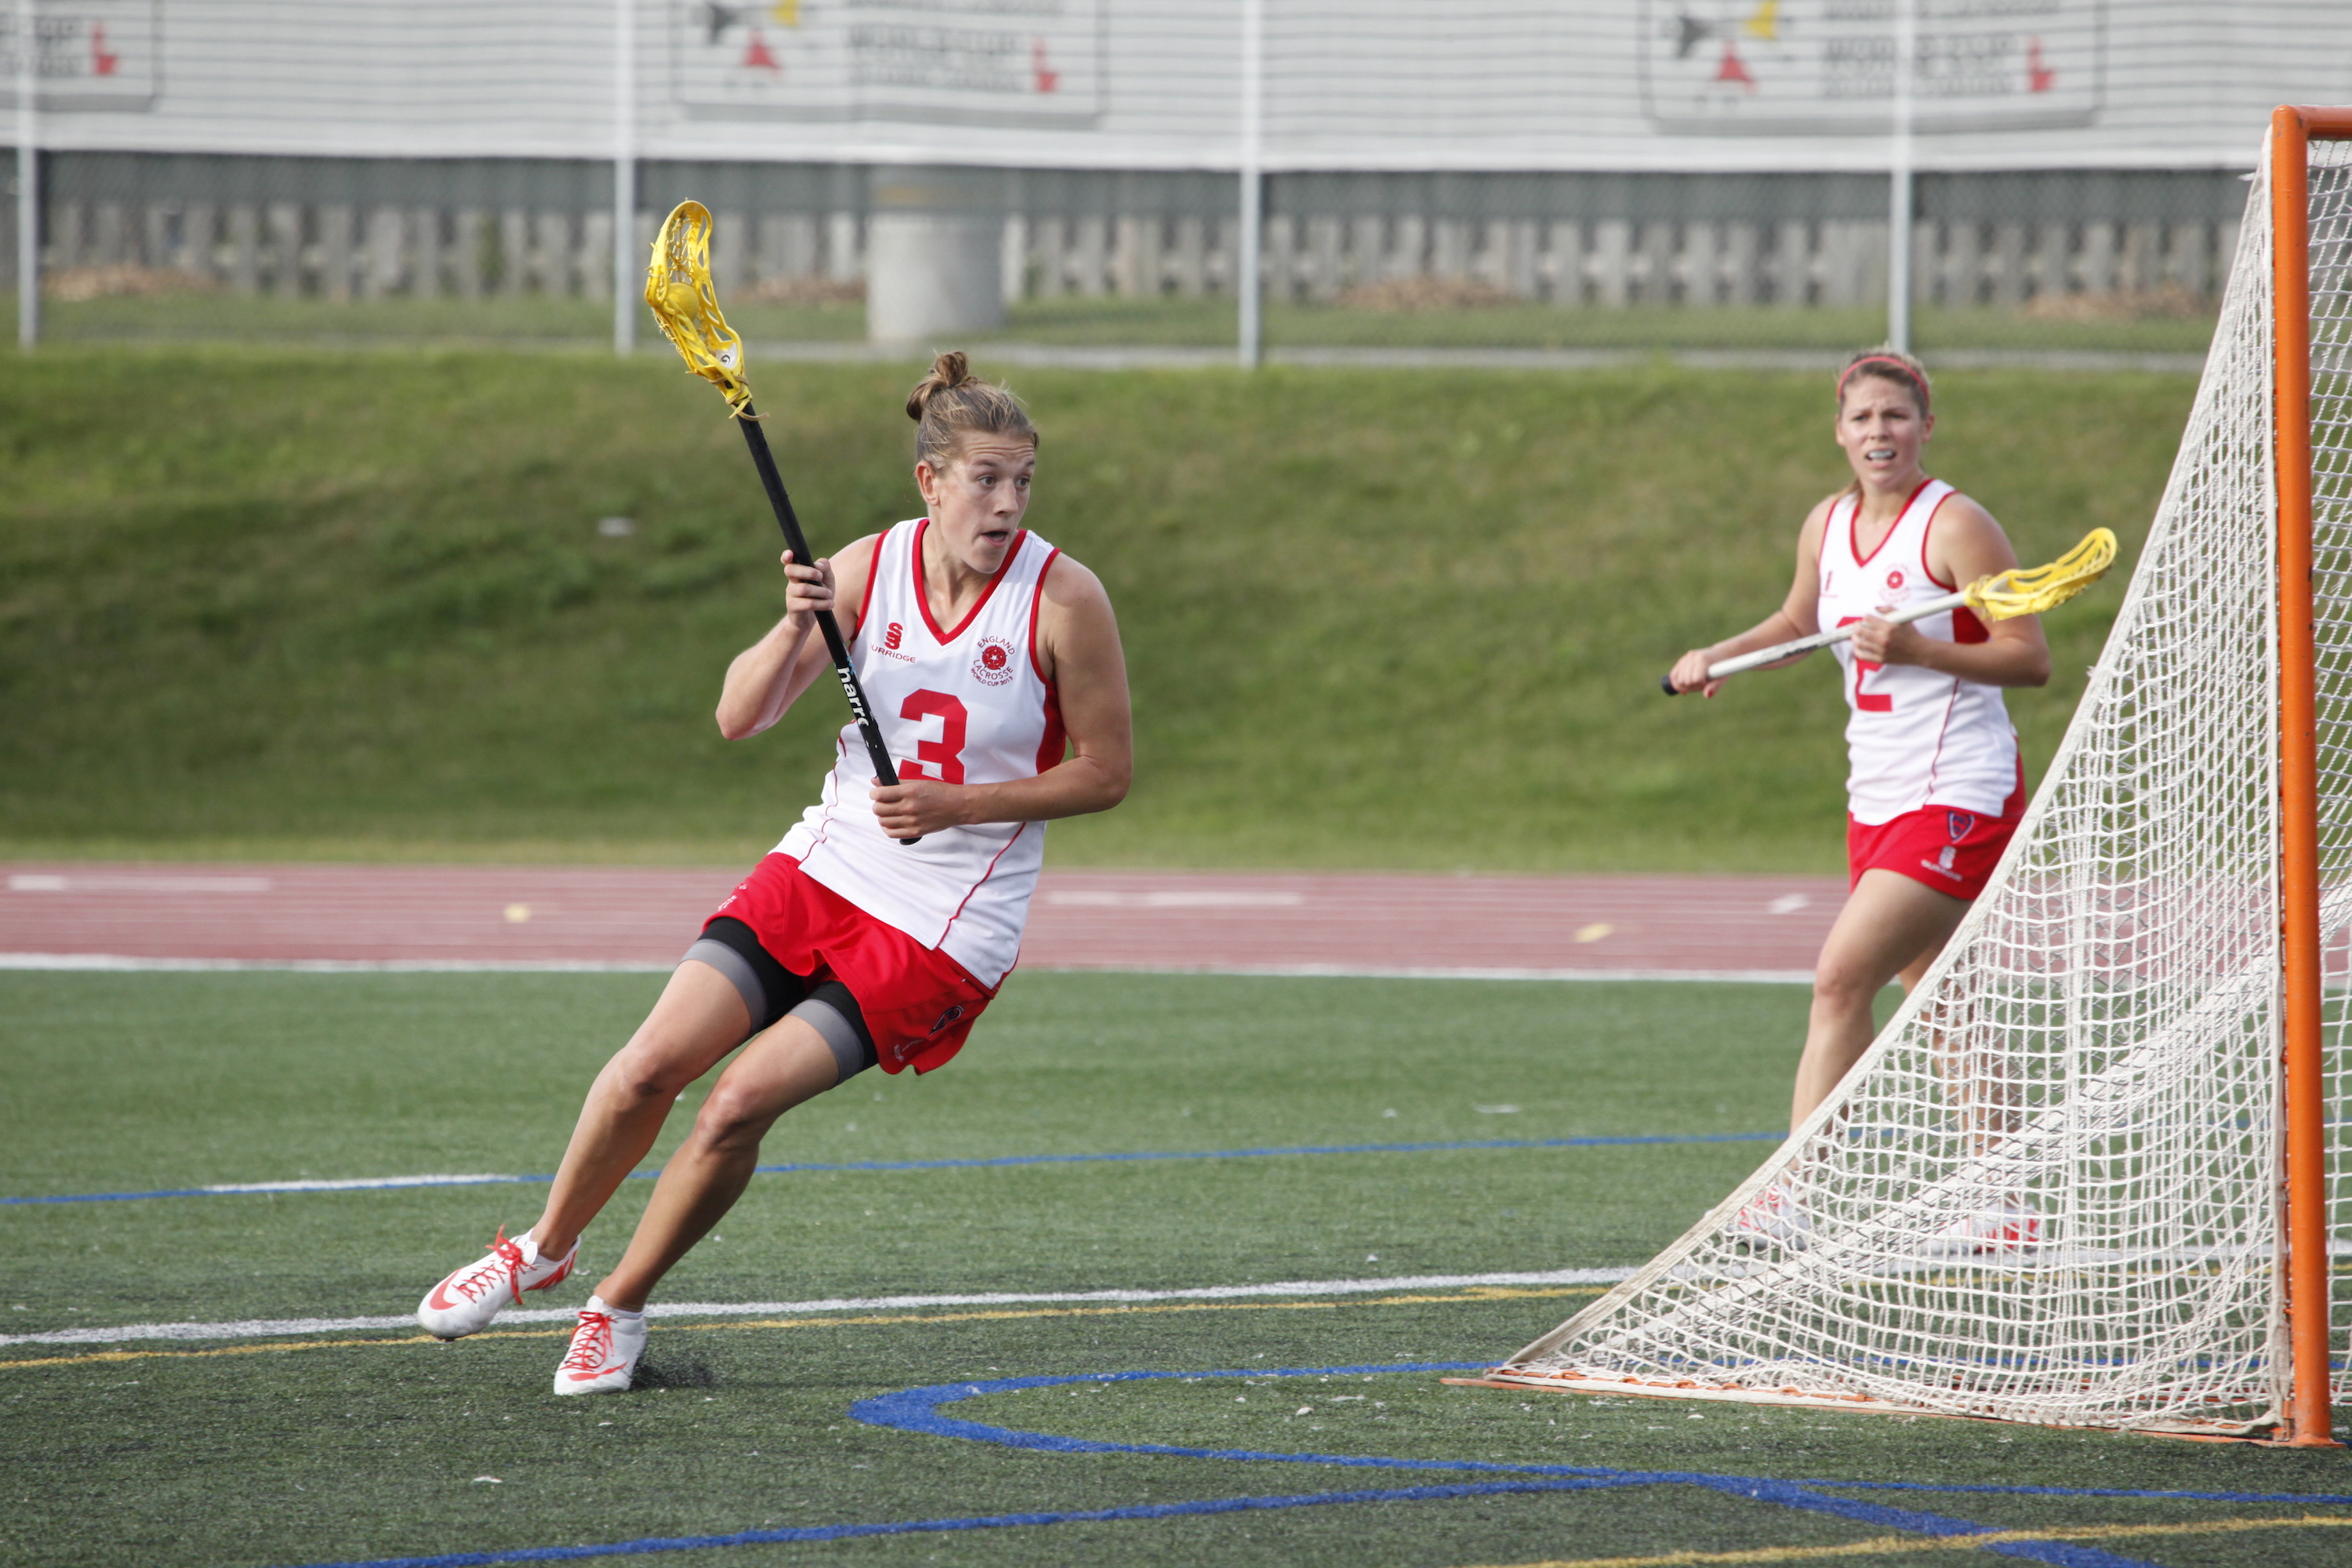 Team STX will play Team England, including Laura Merrifield, at the Surrey Sports Park, home to the 2017 Federation of International Lacrosse (FIL) Rathbones Women’s Lacrosse World Cup.